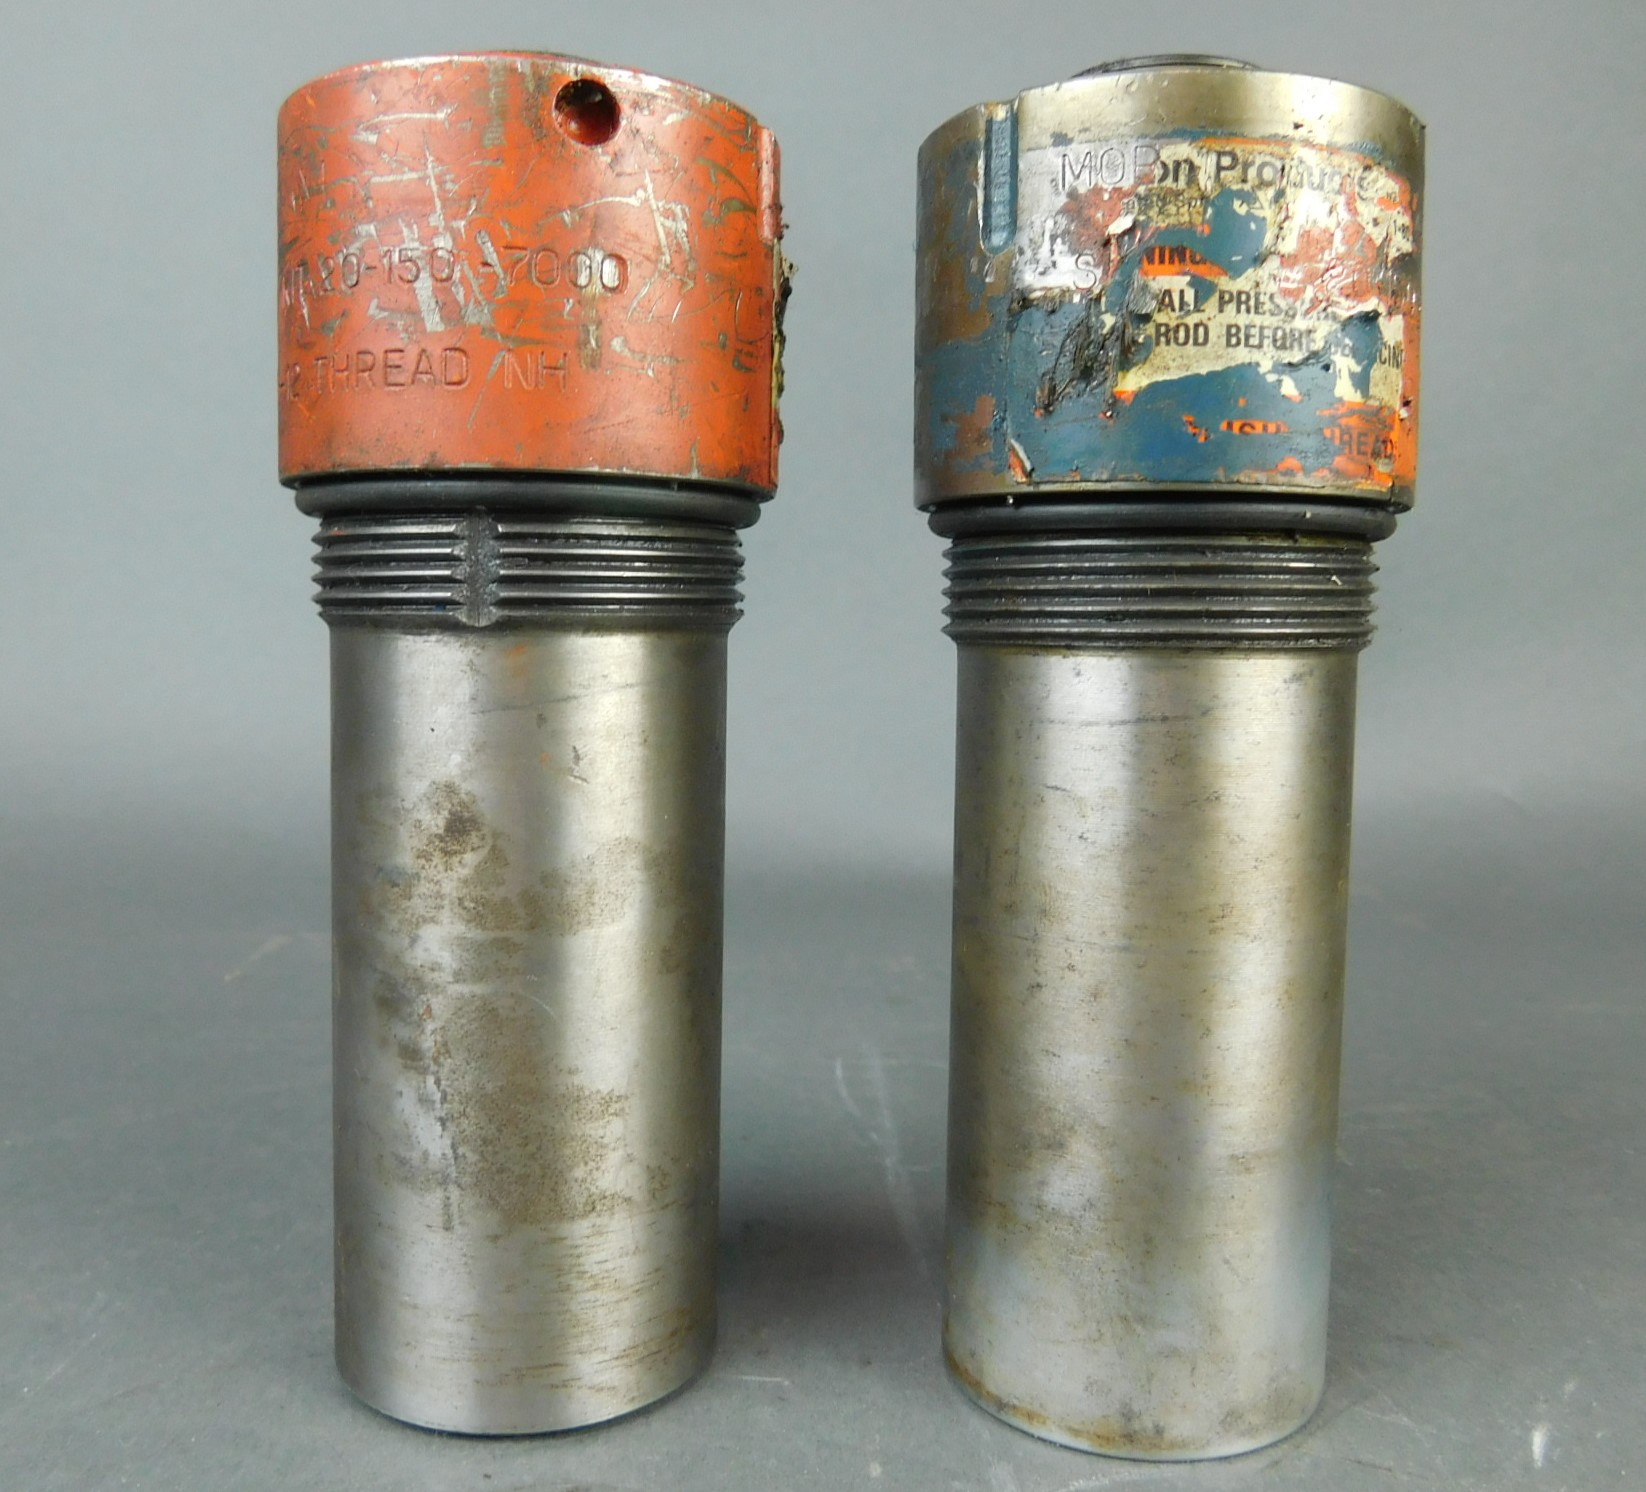 *Lot of 2* Teledyne-Hyson 20-150-7000 Gas Spring Cylinders MOR-D 1×4 1.875-12...